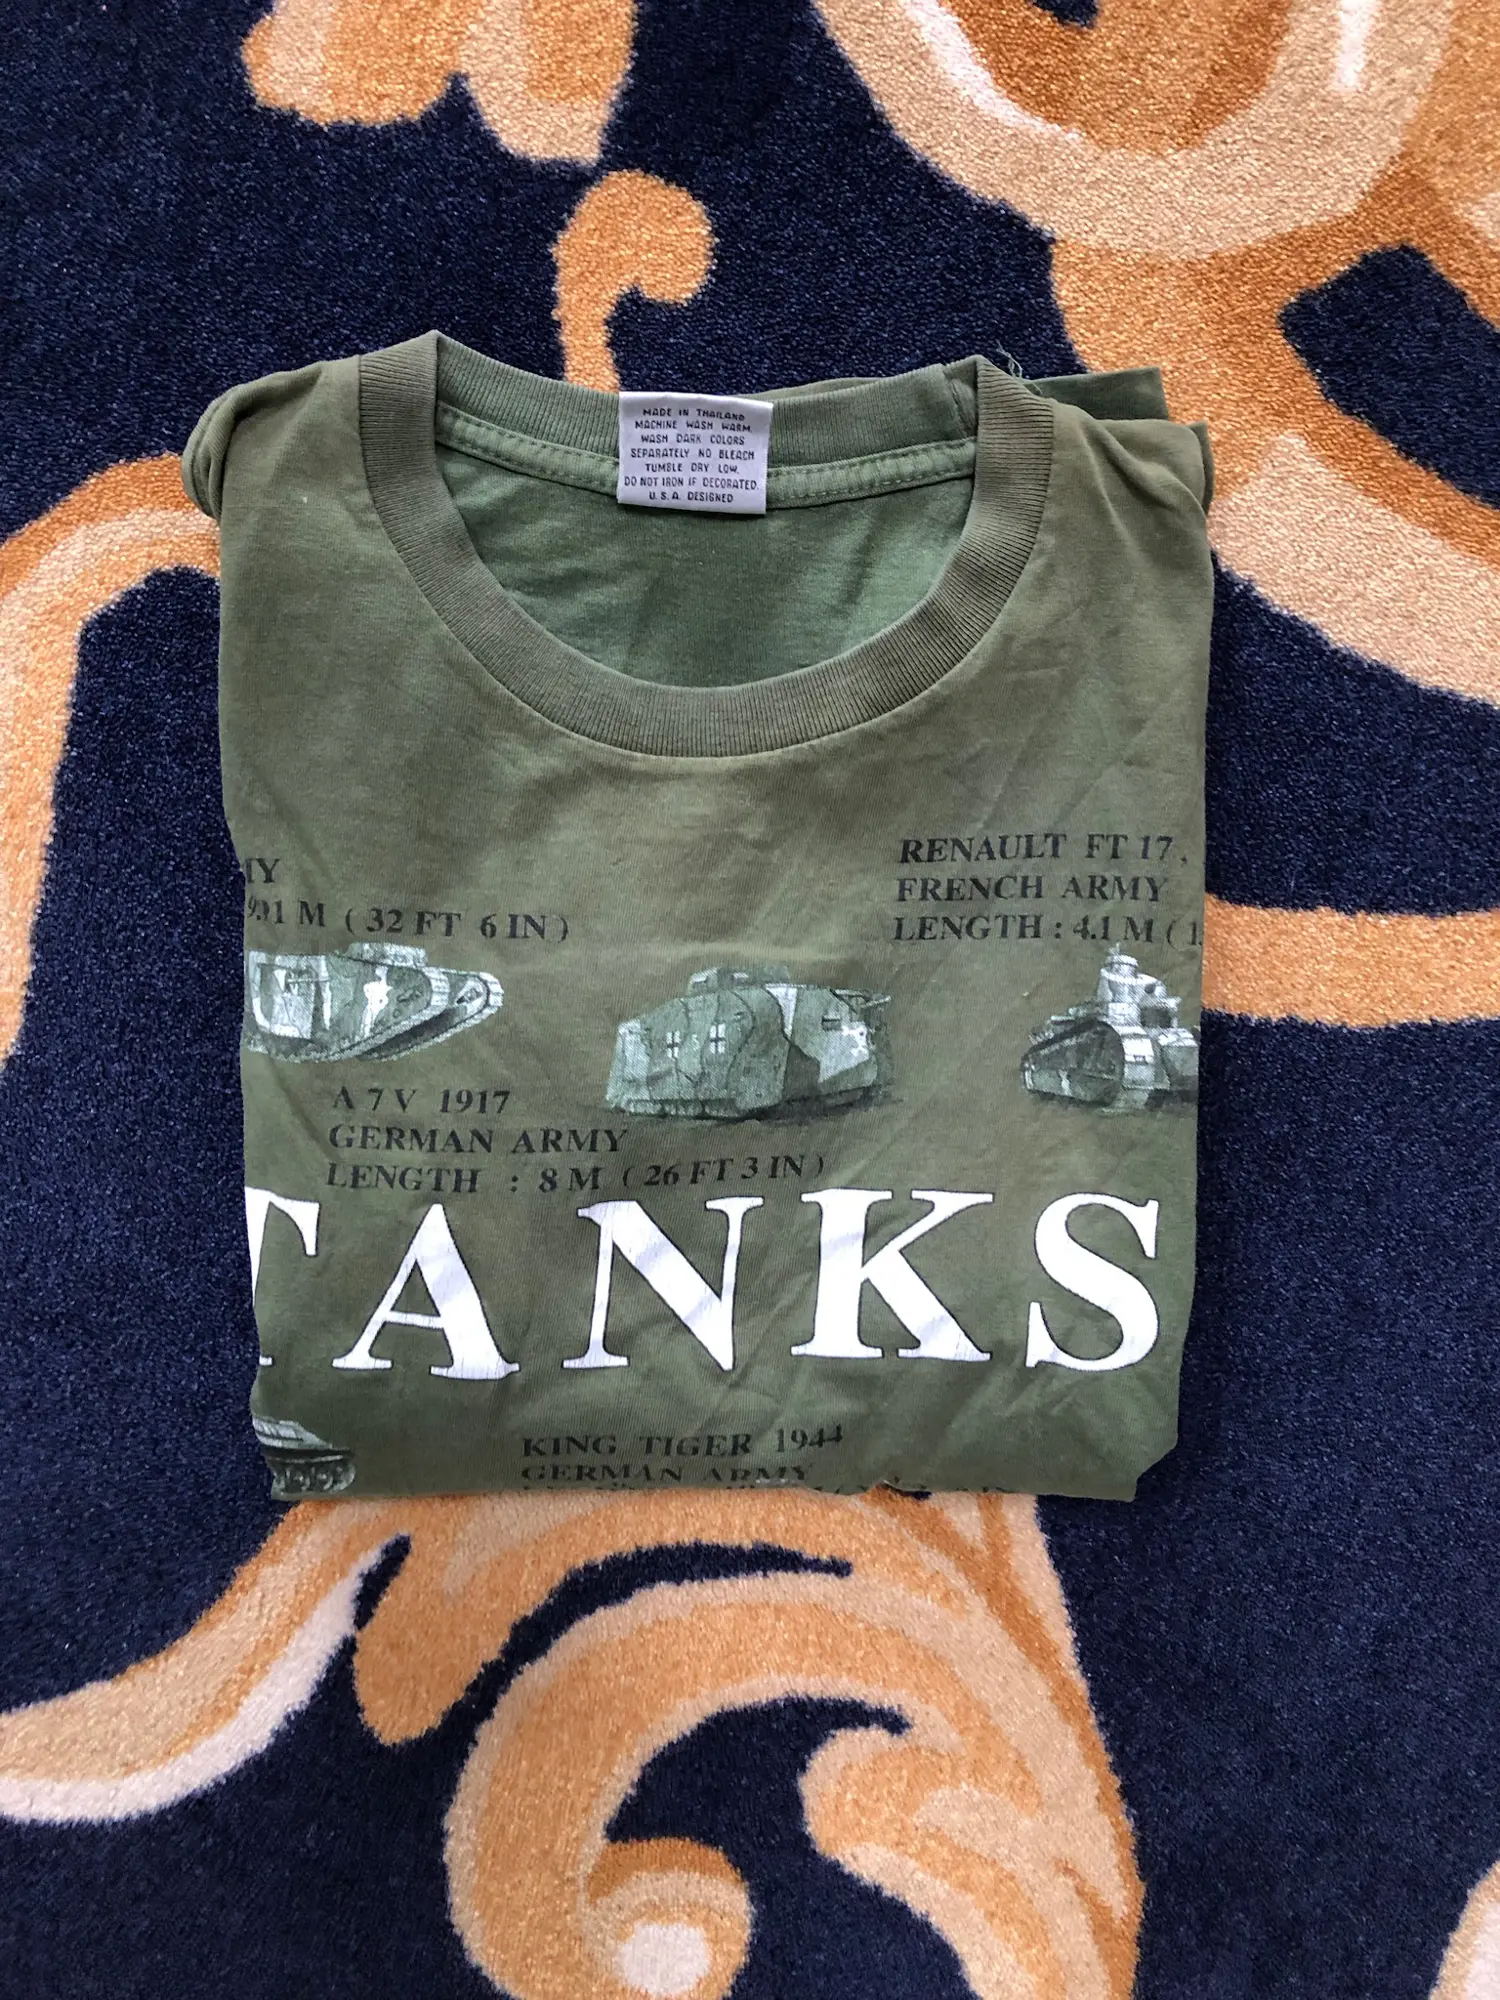 One Vintage t-shirt